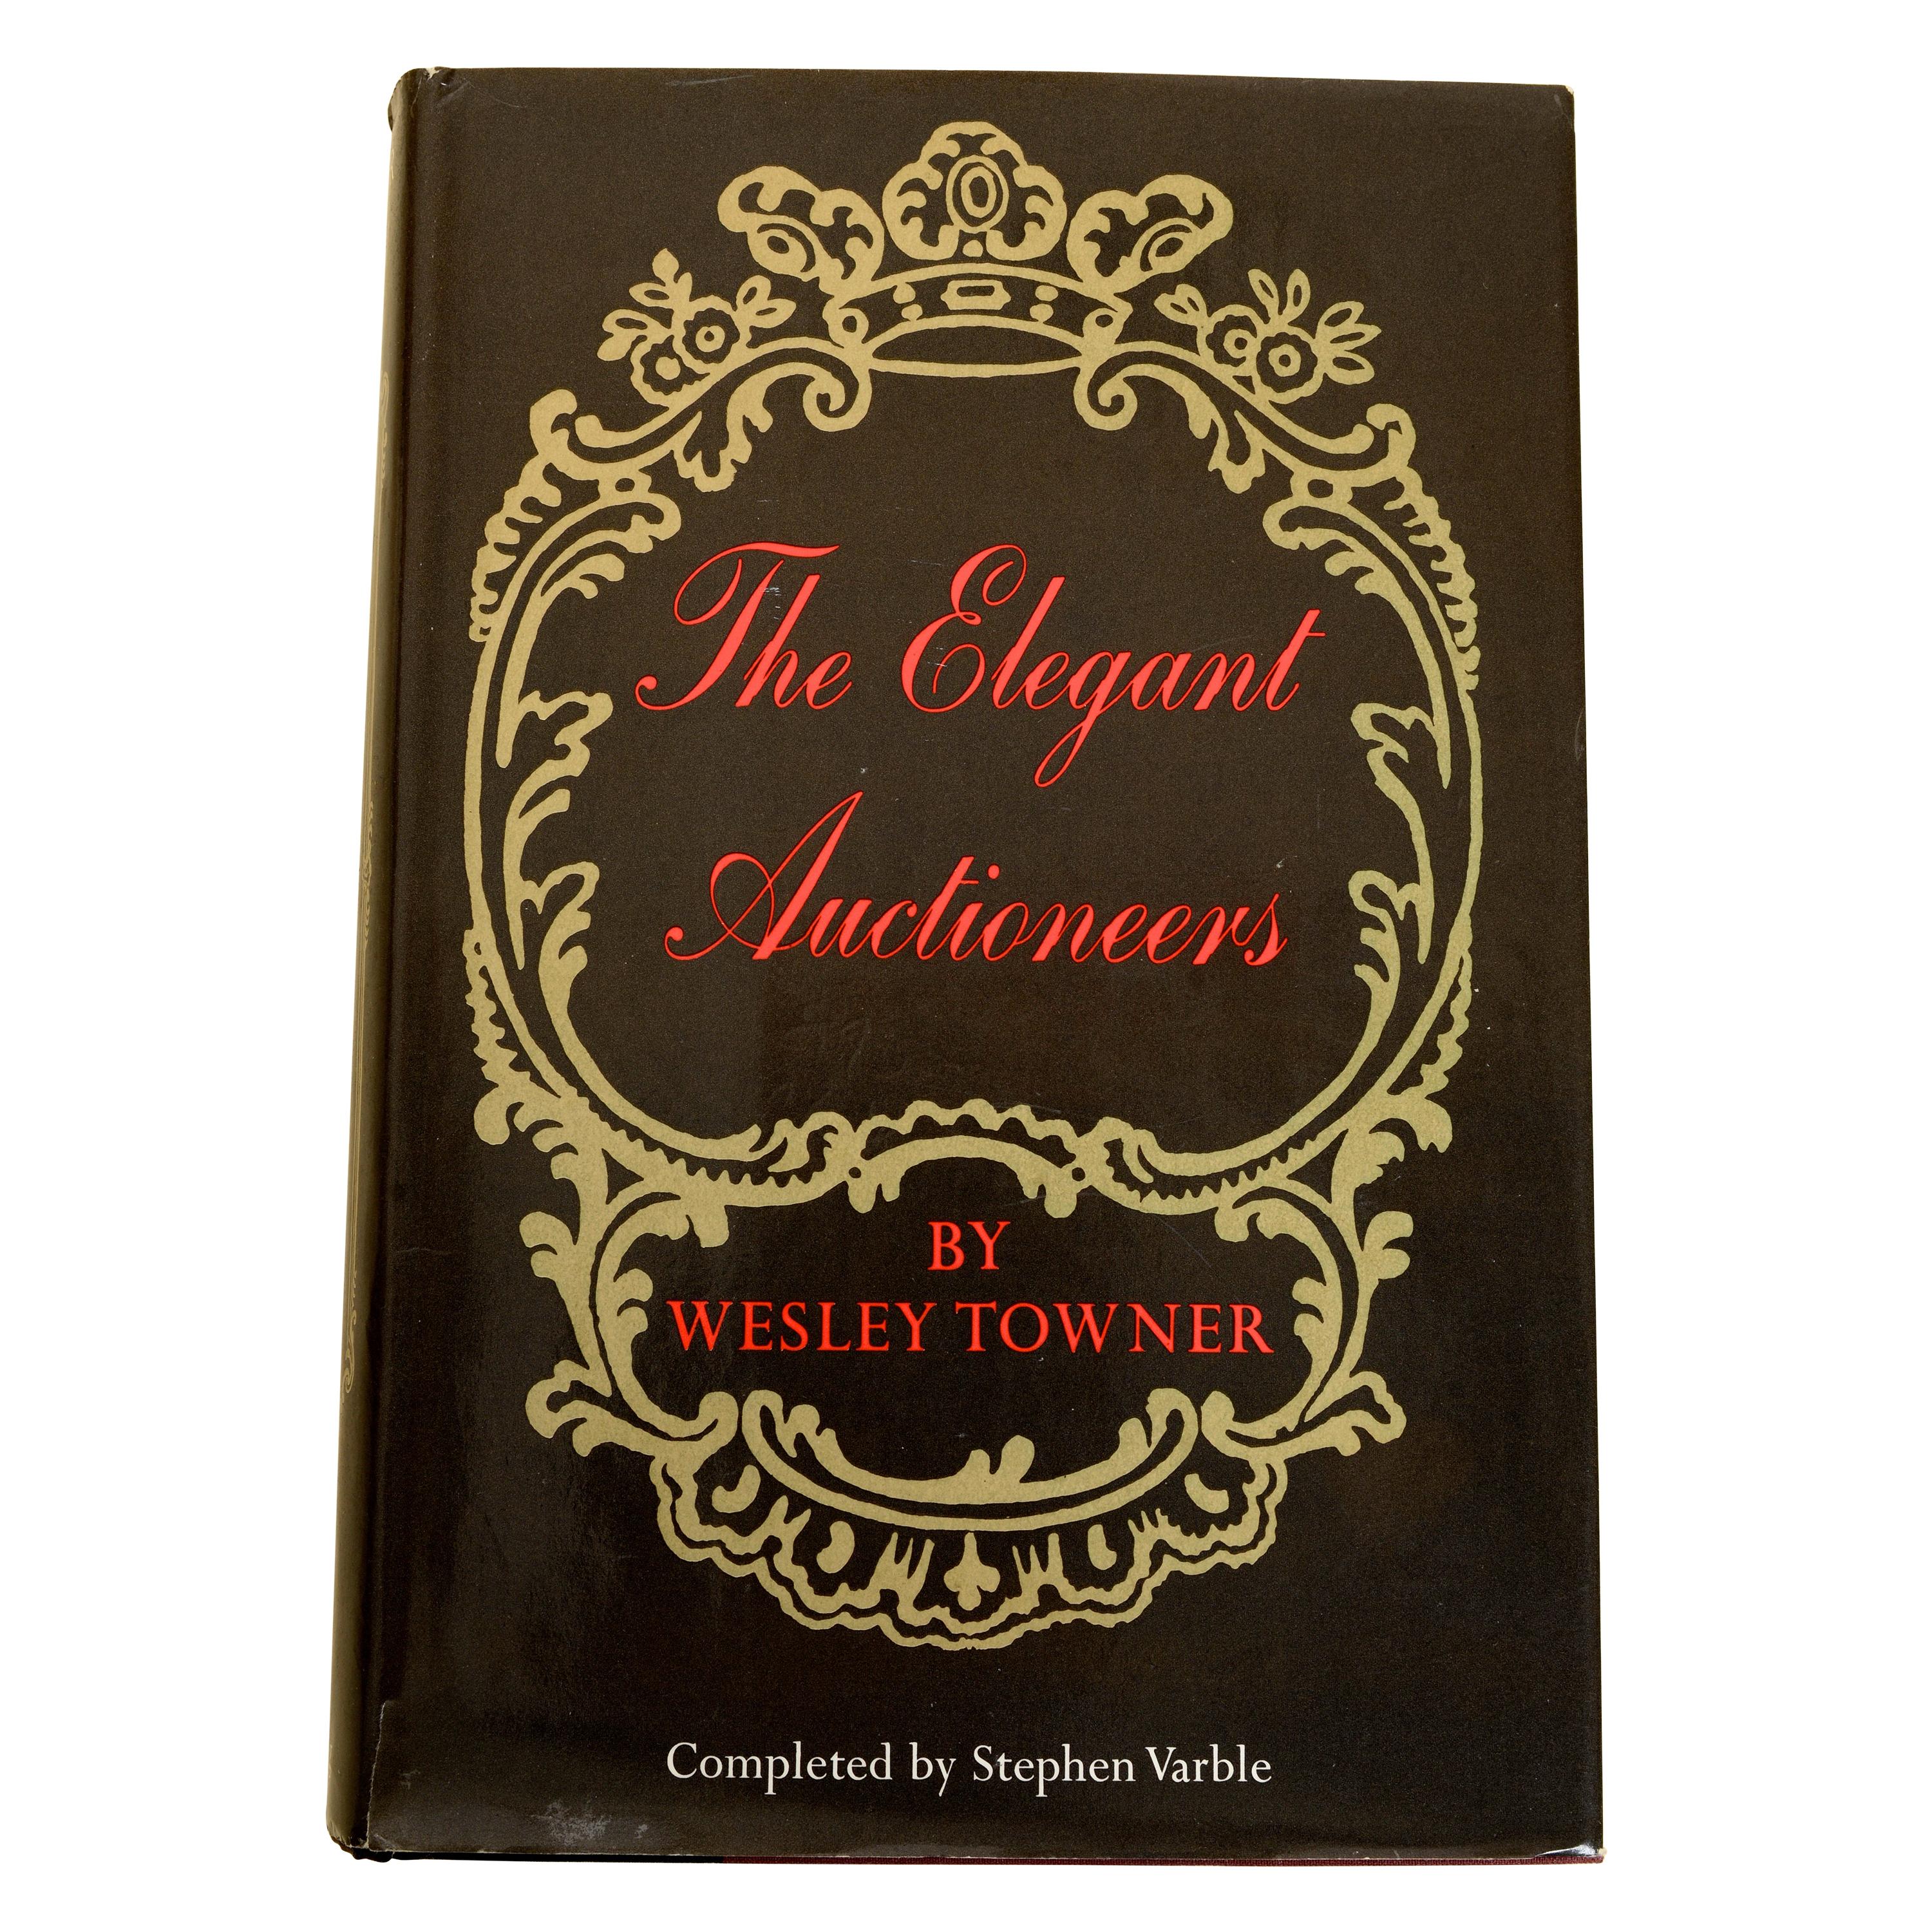 The Elegant Auctioneers by Wesley Towner and Stephen Varble, Stated 1st Ed